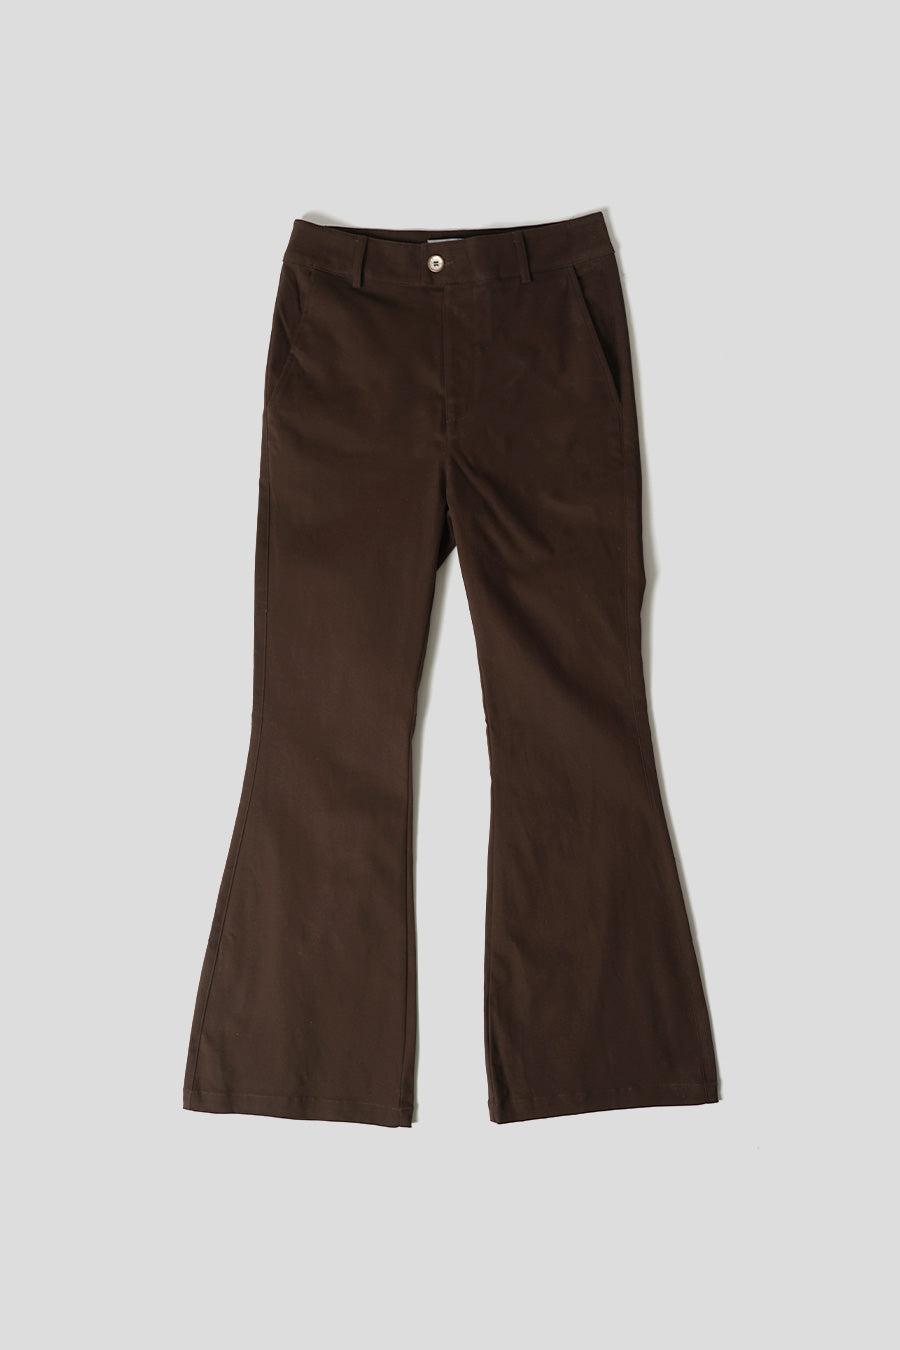 house of sunny - BROWN FLARED TROUSERS - LE LABO STORE